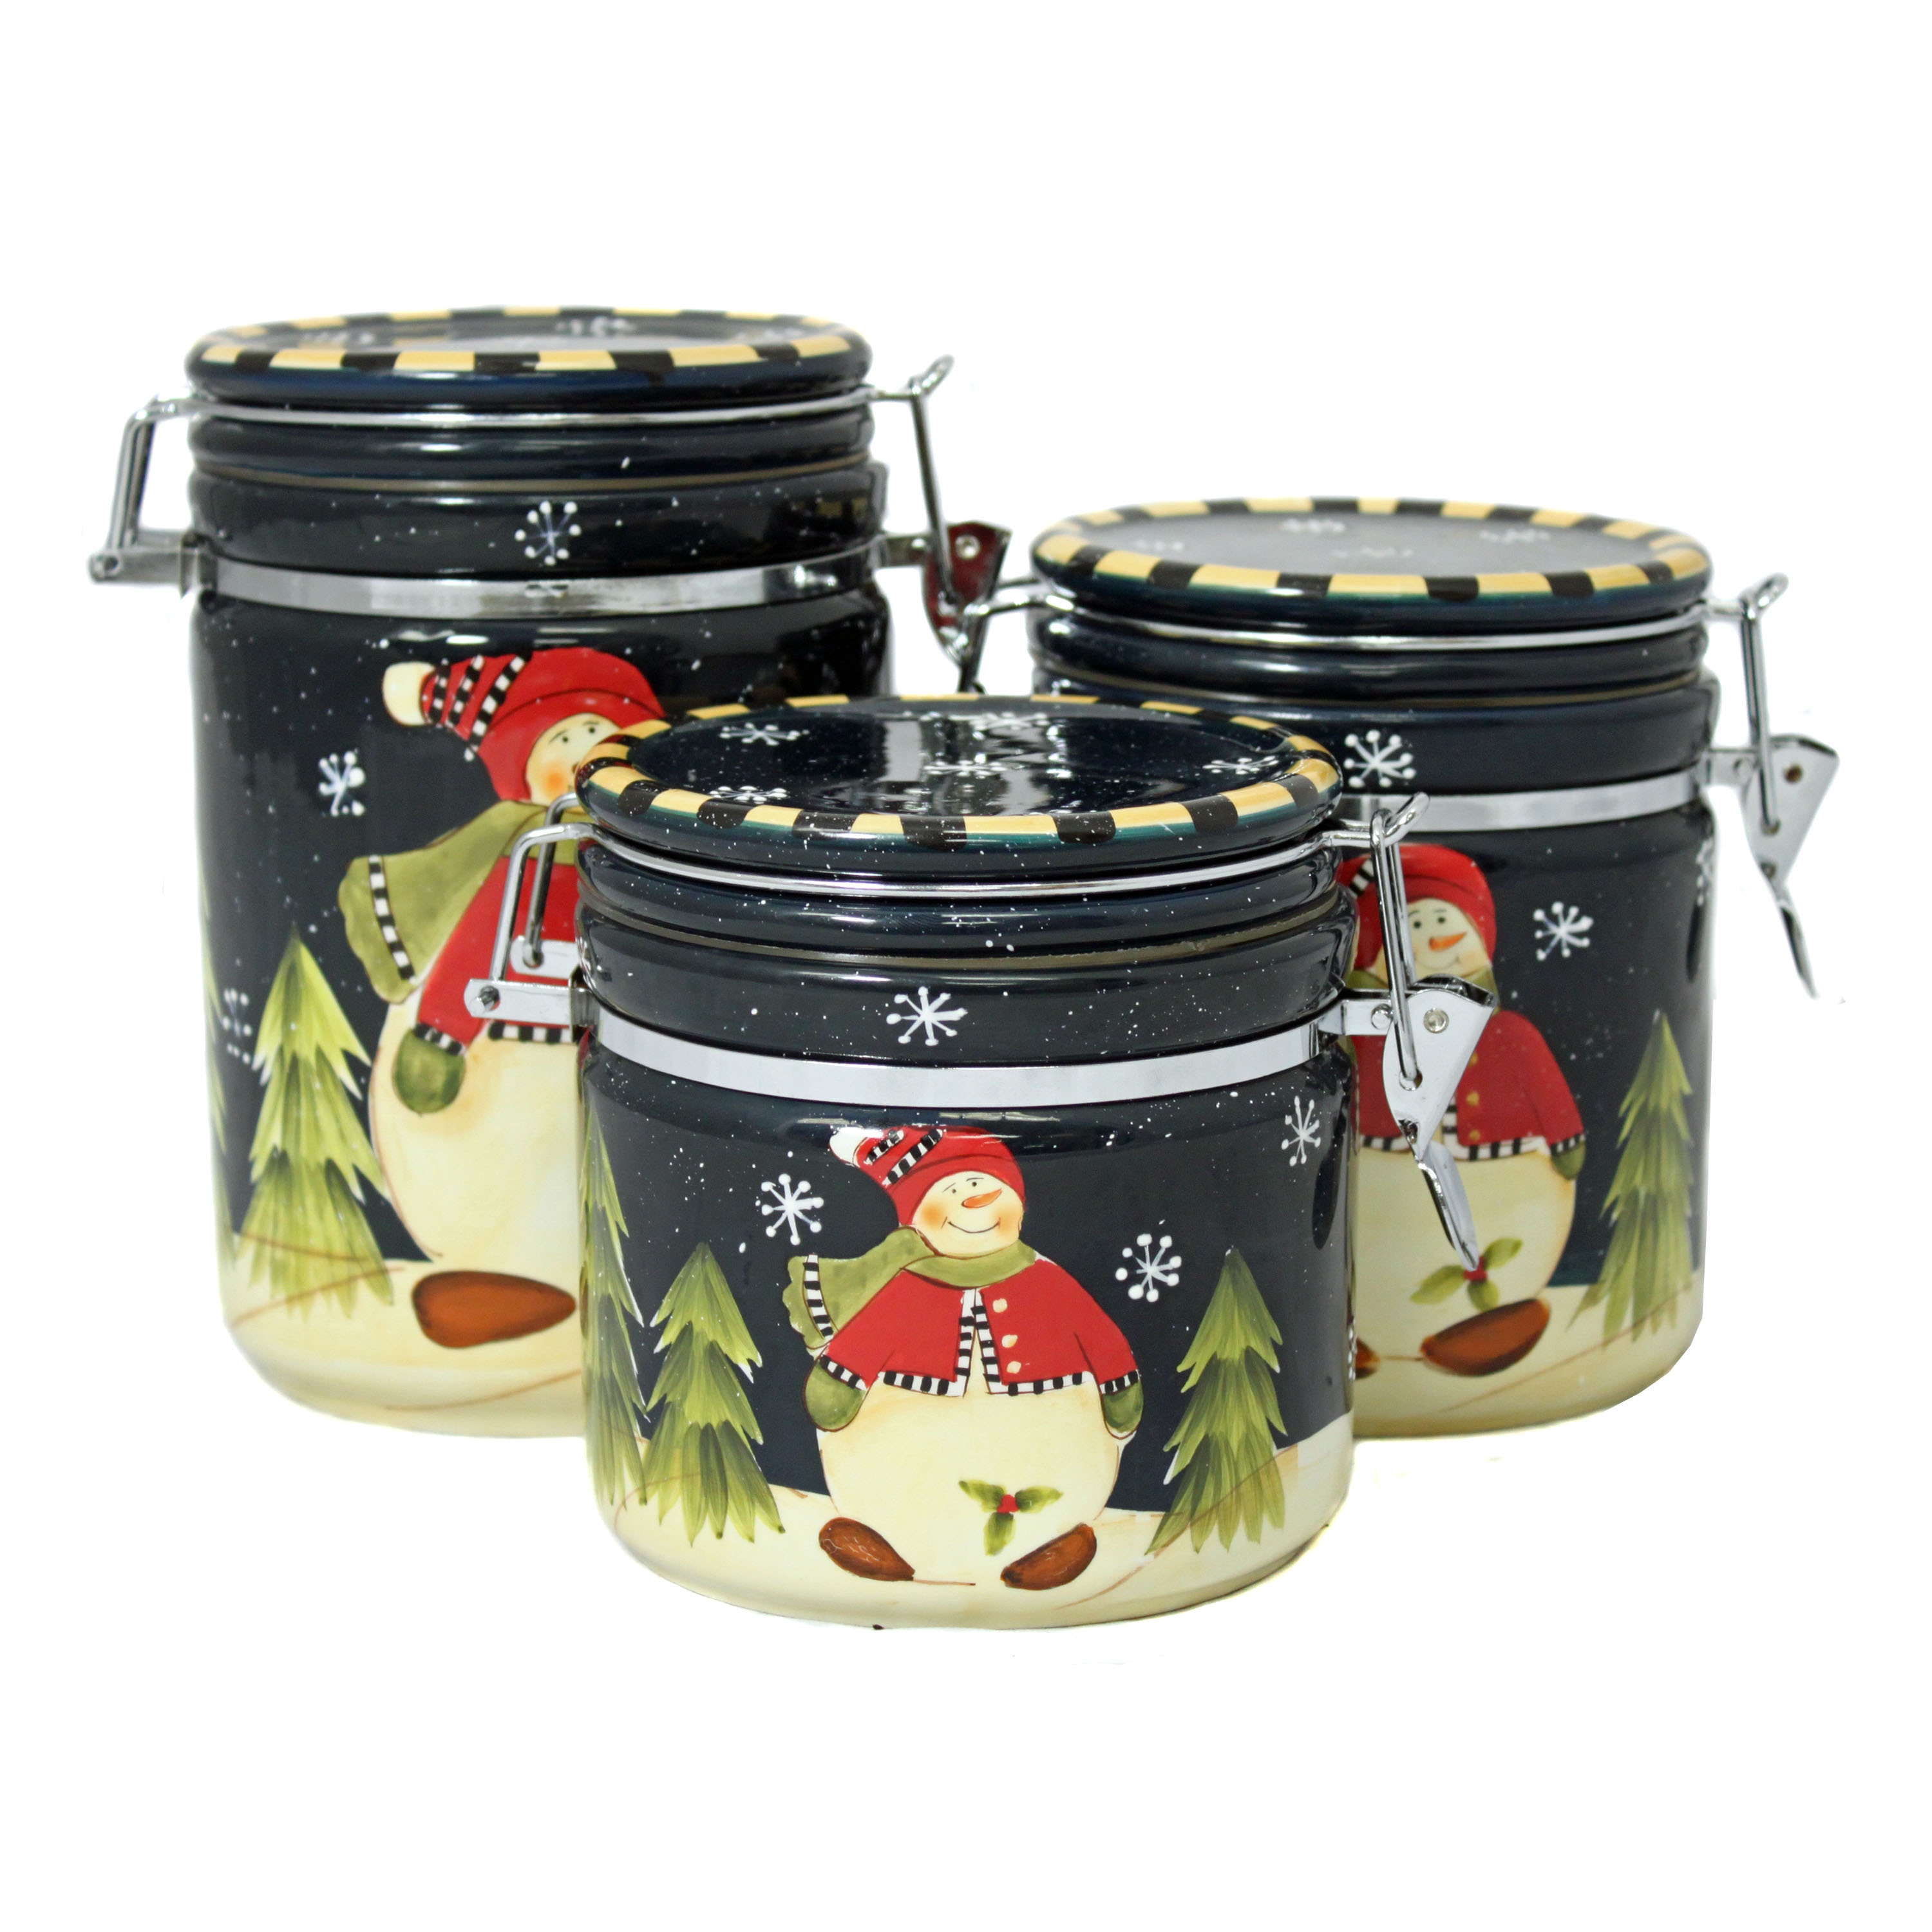 Snowman Delight Hand Painted 3 Piece Canister Set Today $47.99 5.0 (2